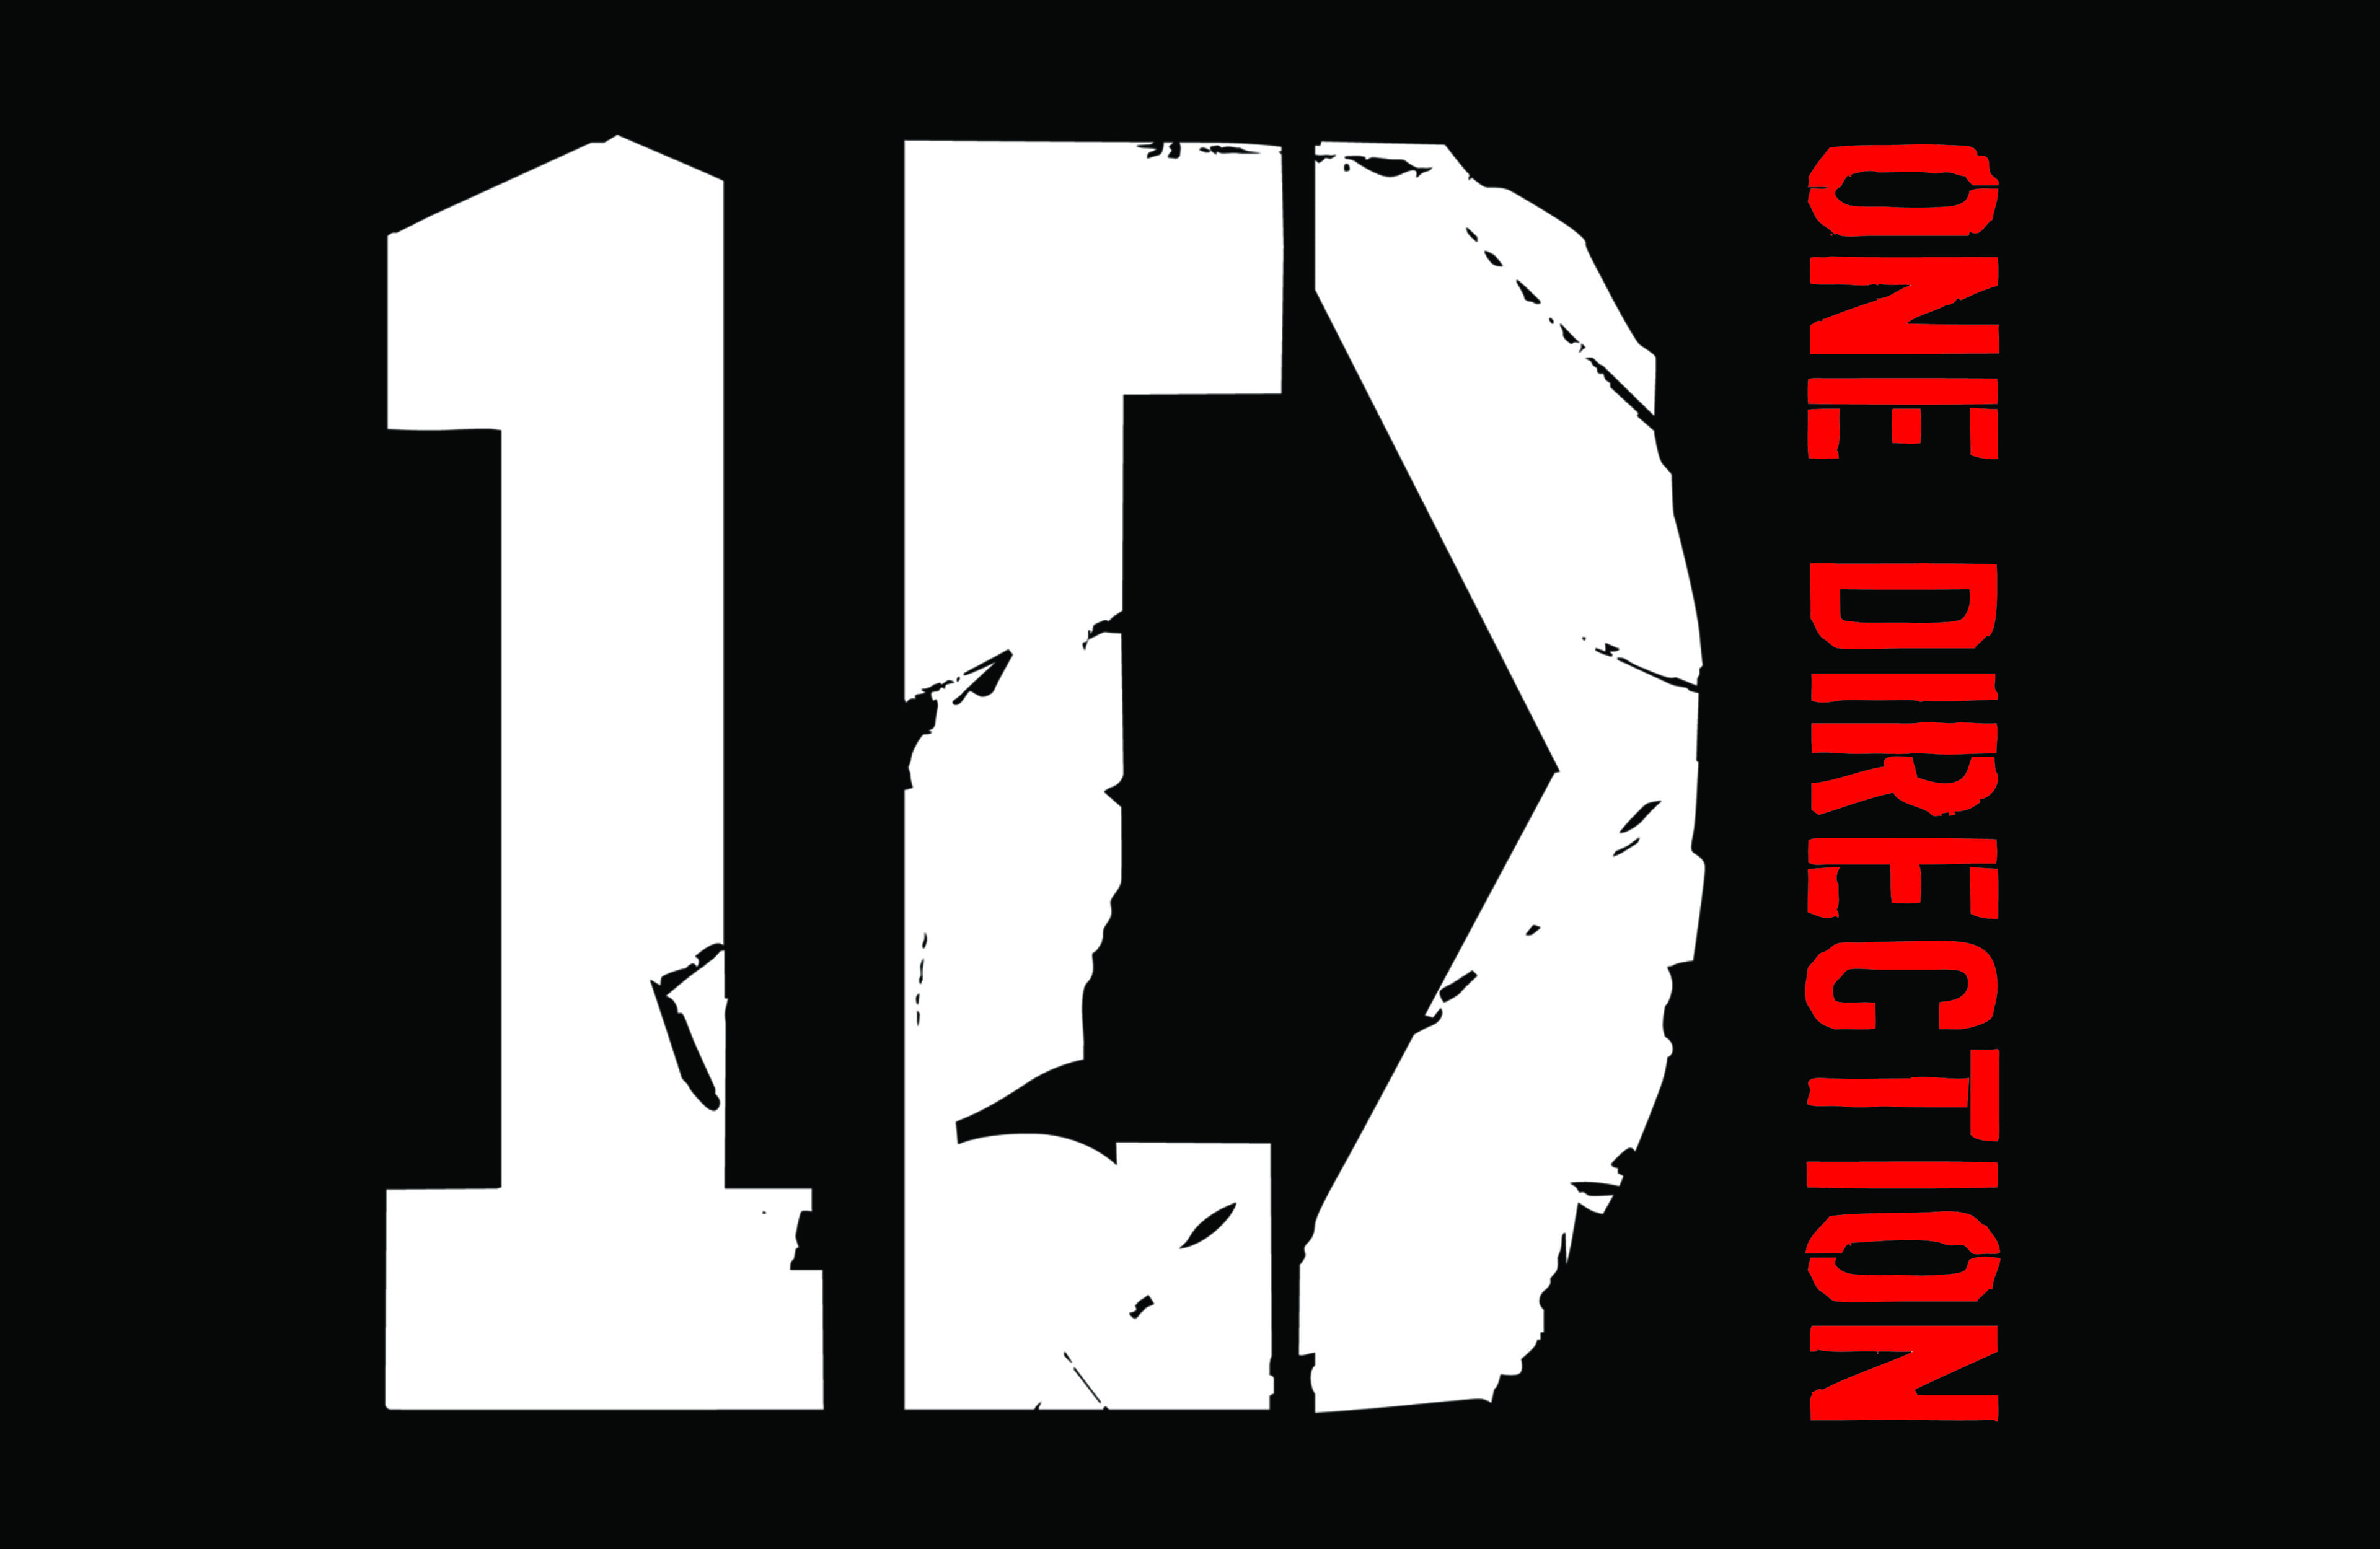 One Direction Logo Drawing by NeonCrayons - DragoArt